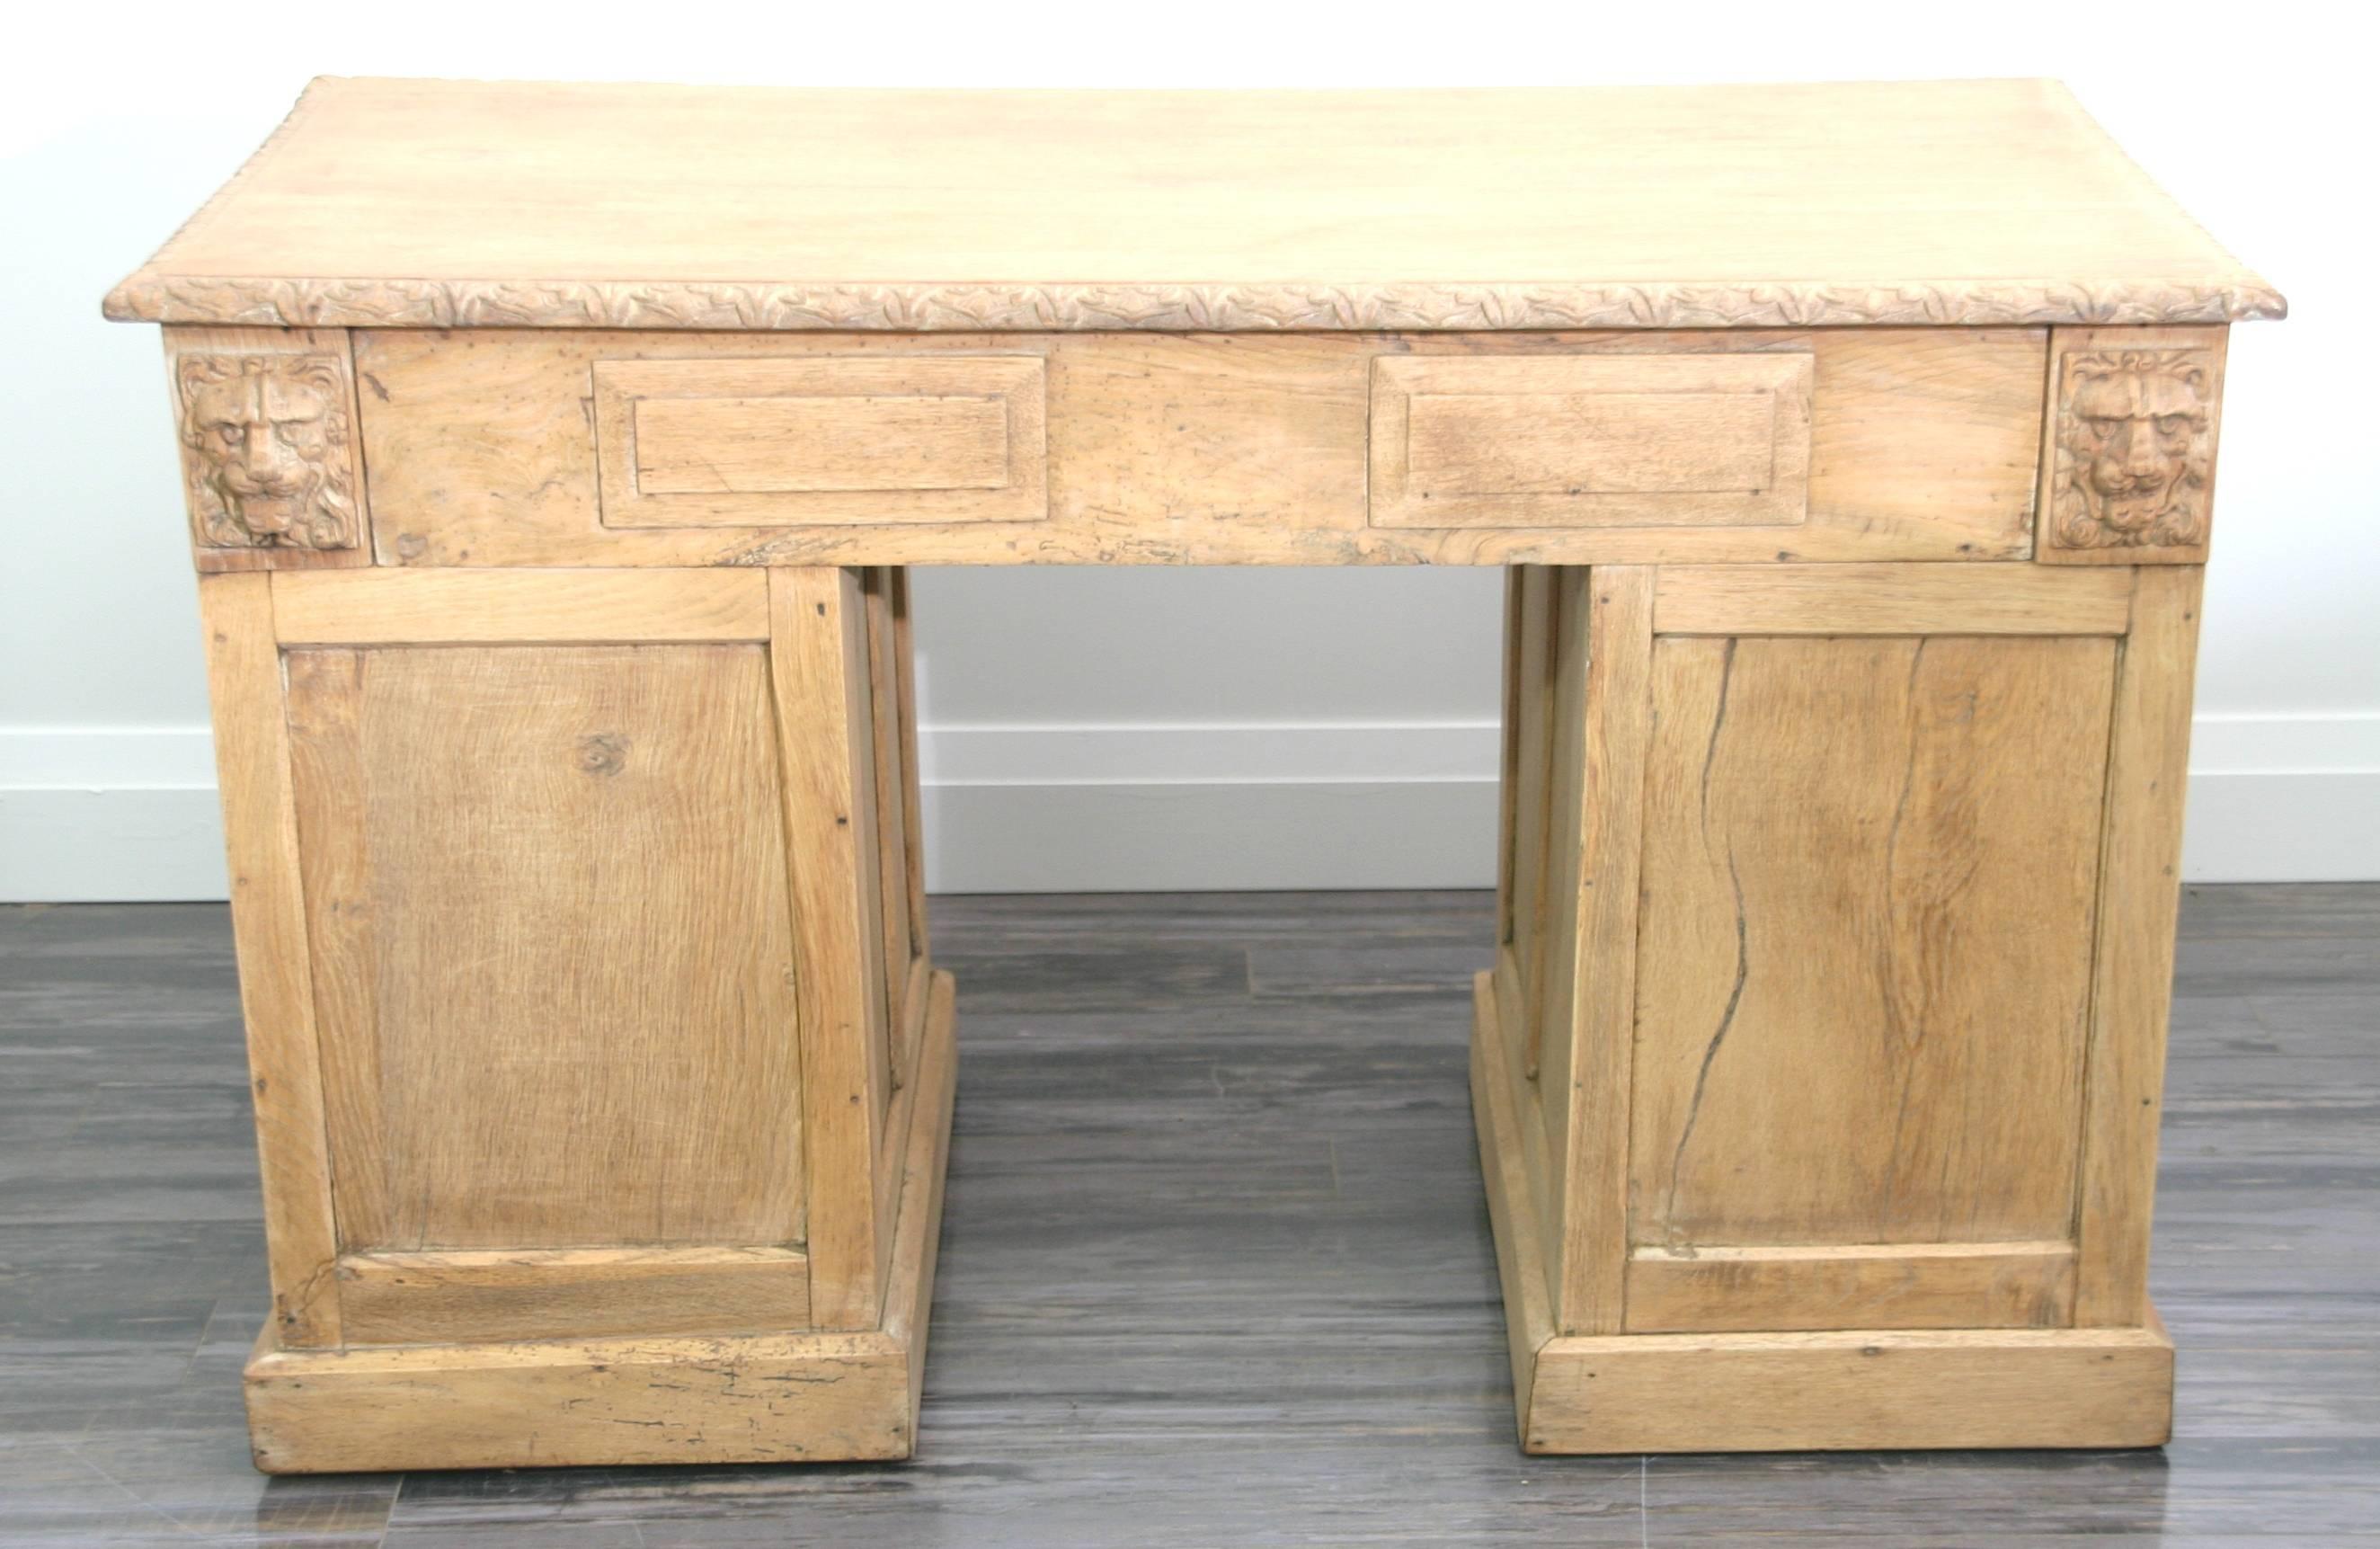 High quality desk made from English brown oak, totally hand-carved with lion heads and relief carved drawers fitted with solid brass drop hardware.